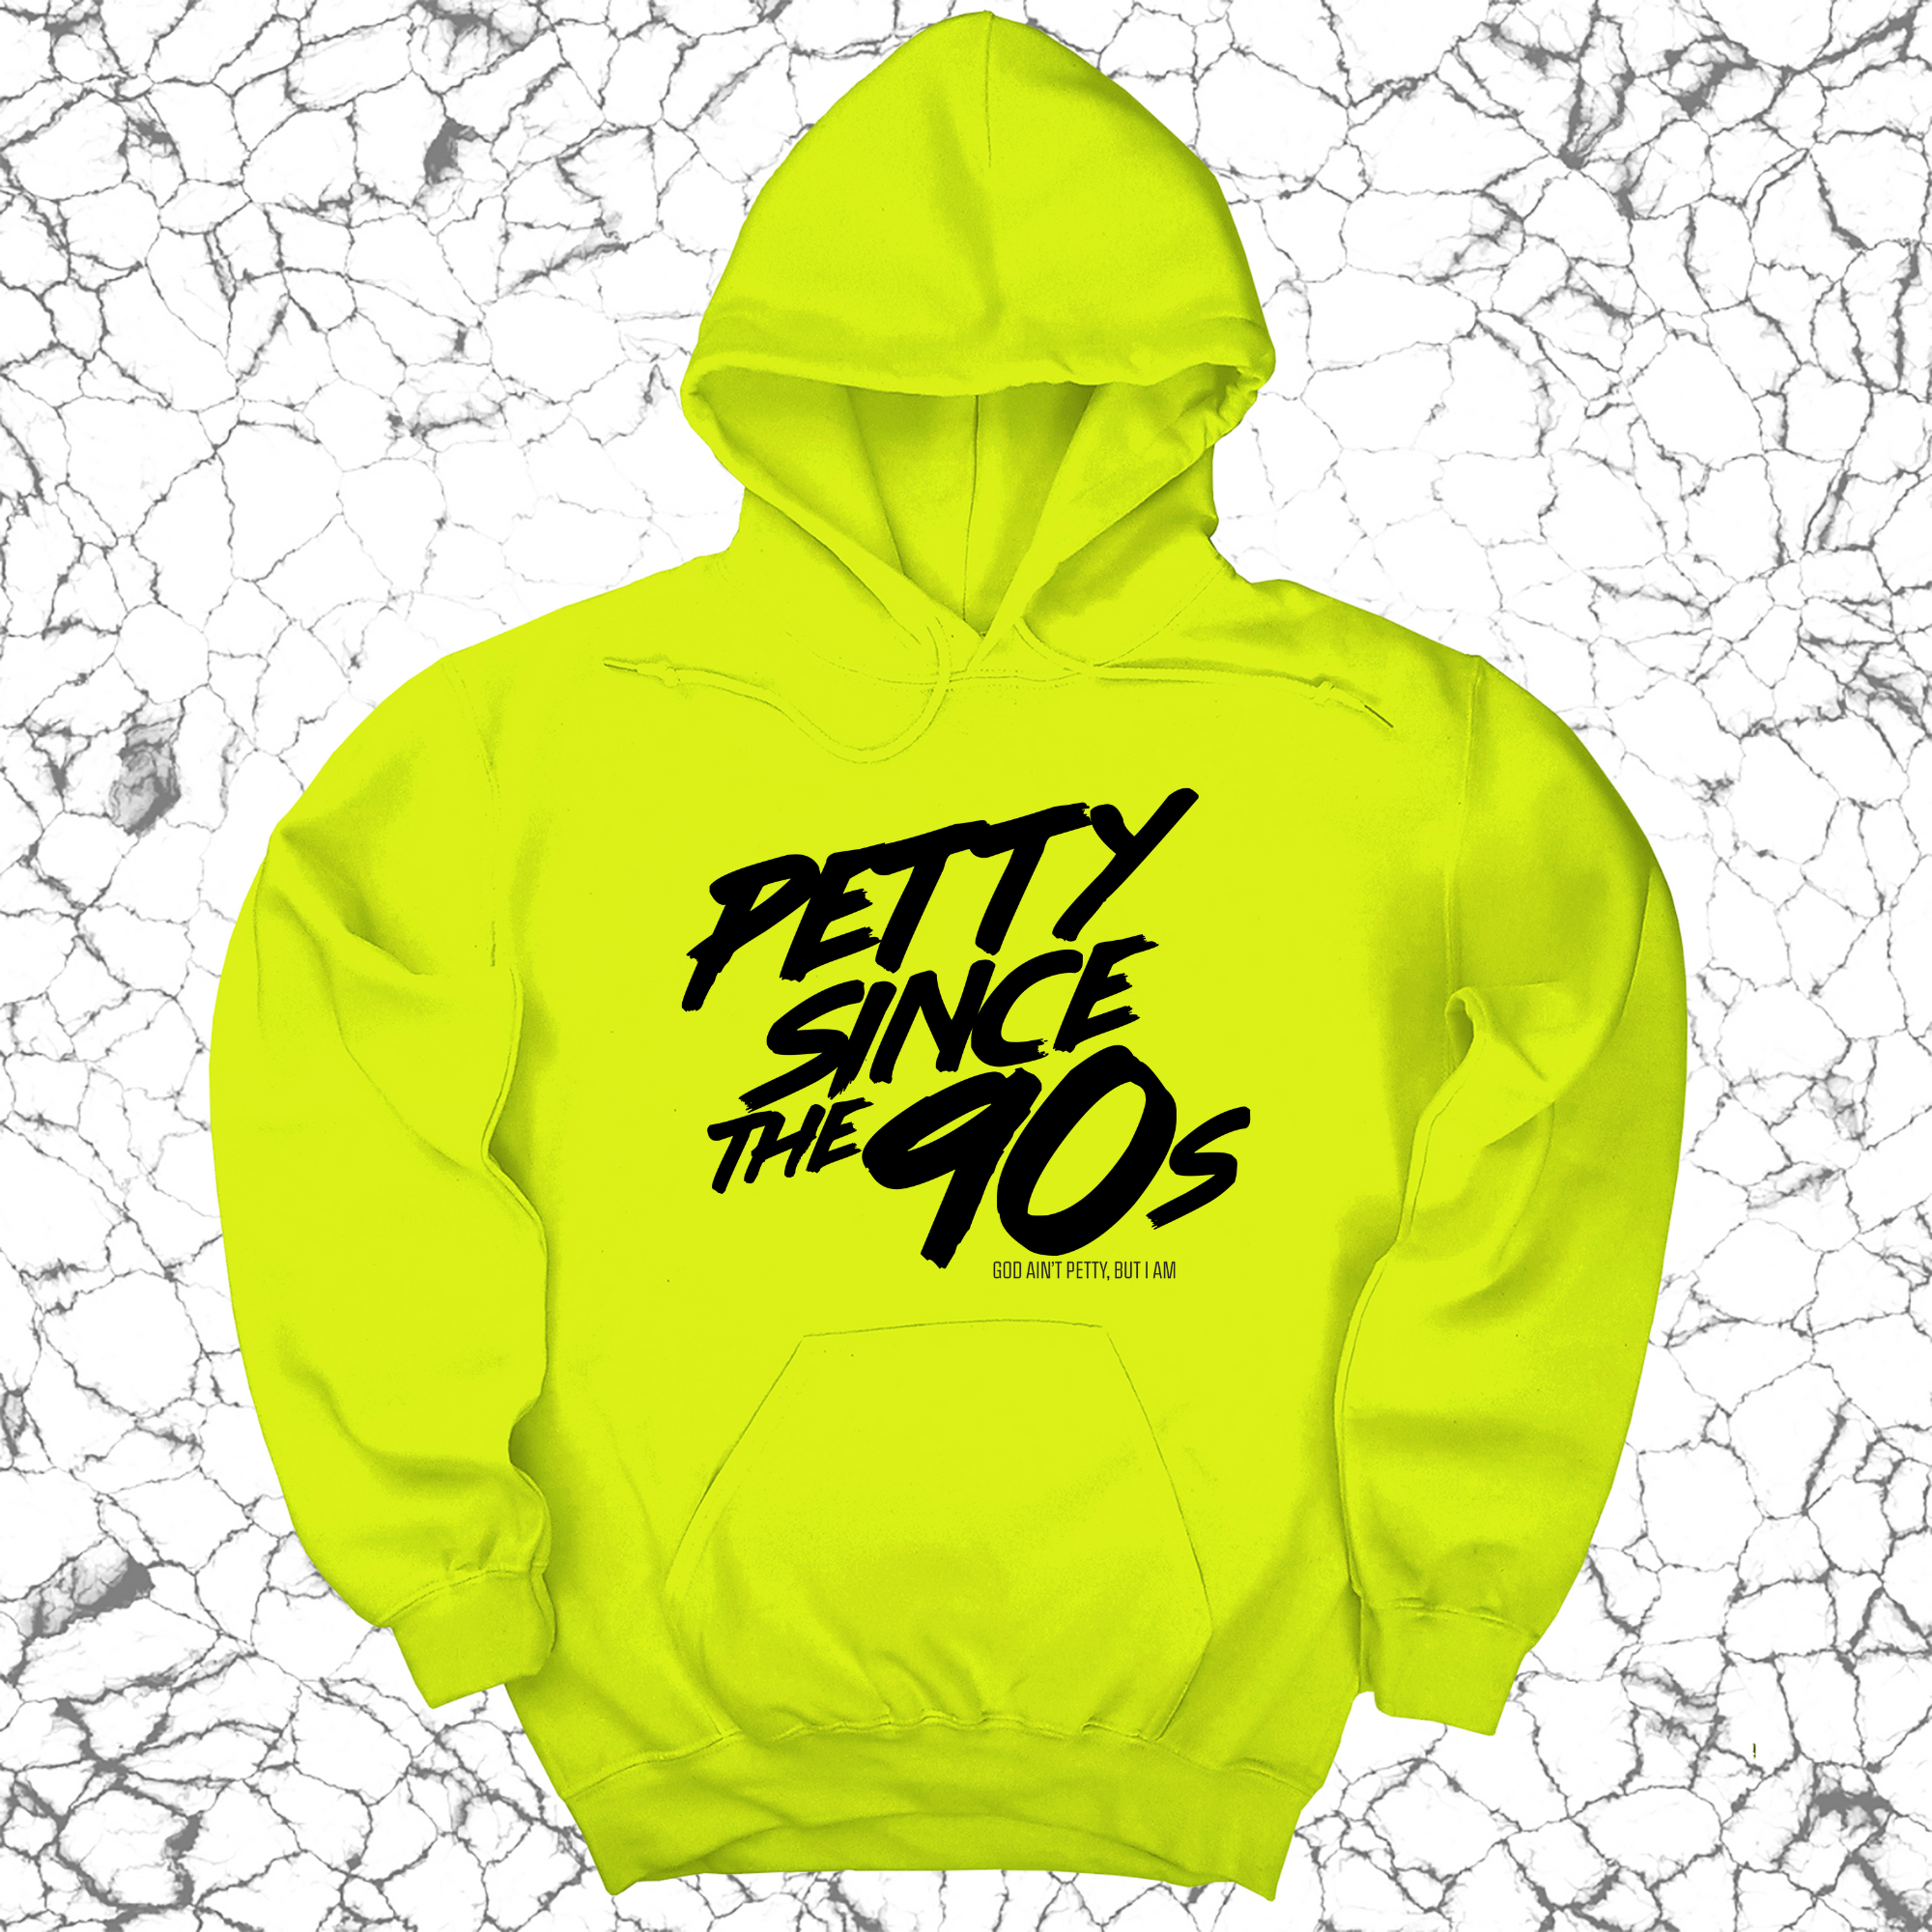 Petty Since the 90s Unisex Hoodie-Hoodie-The Original God Ain't Petty But I Am